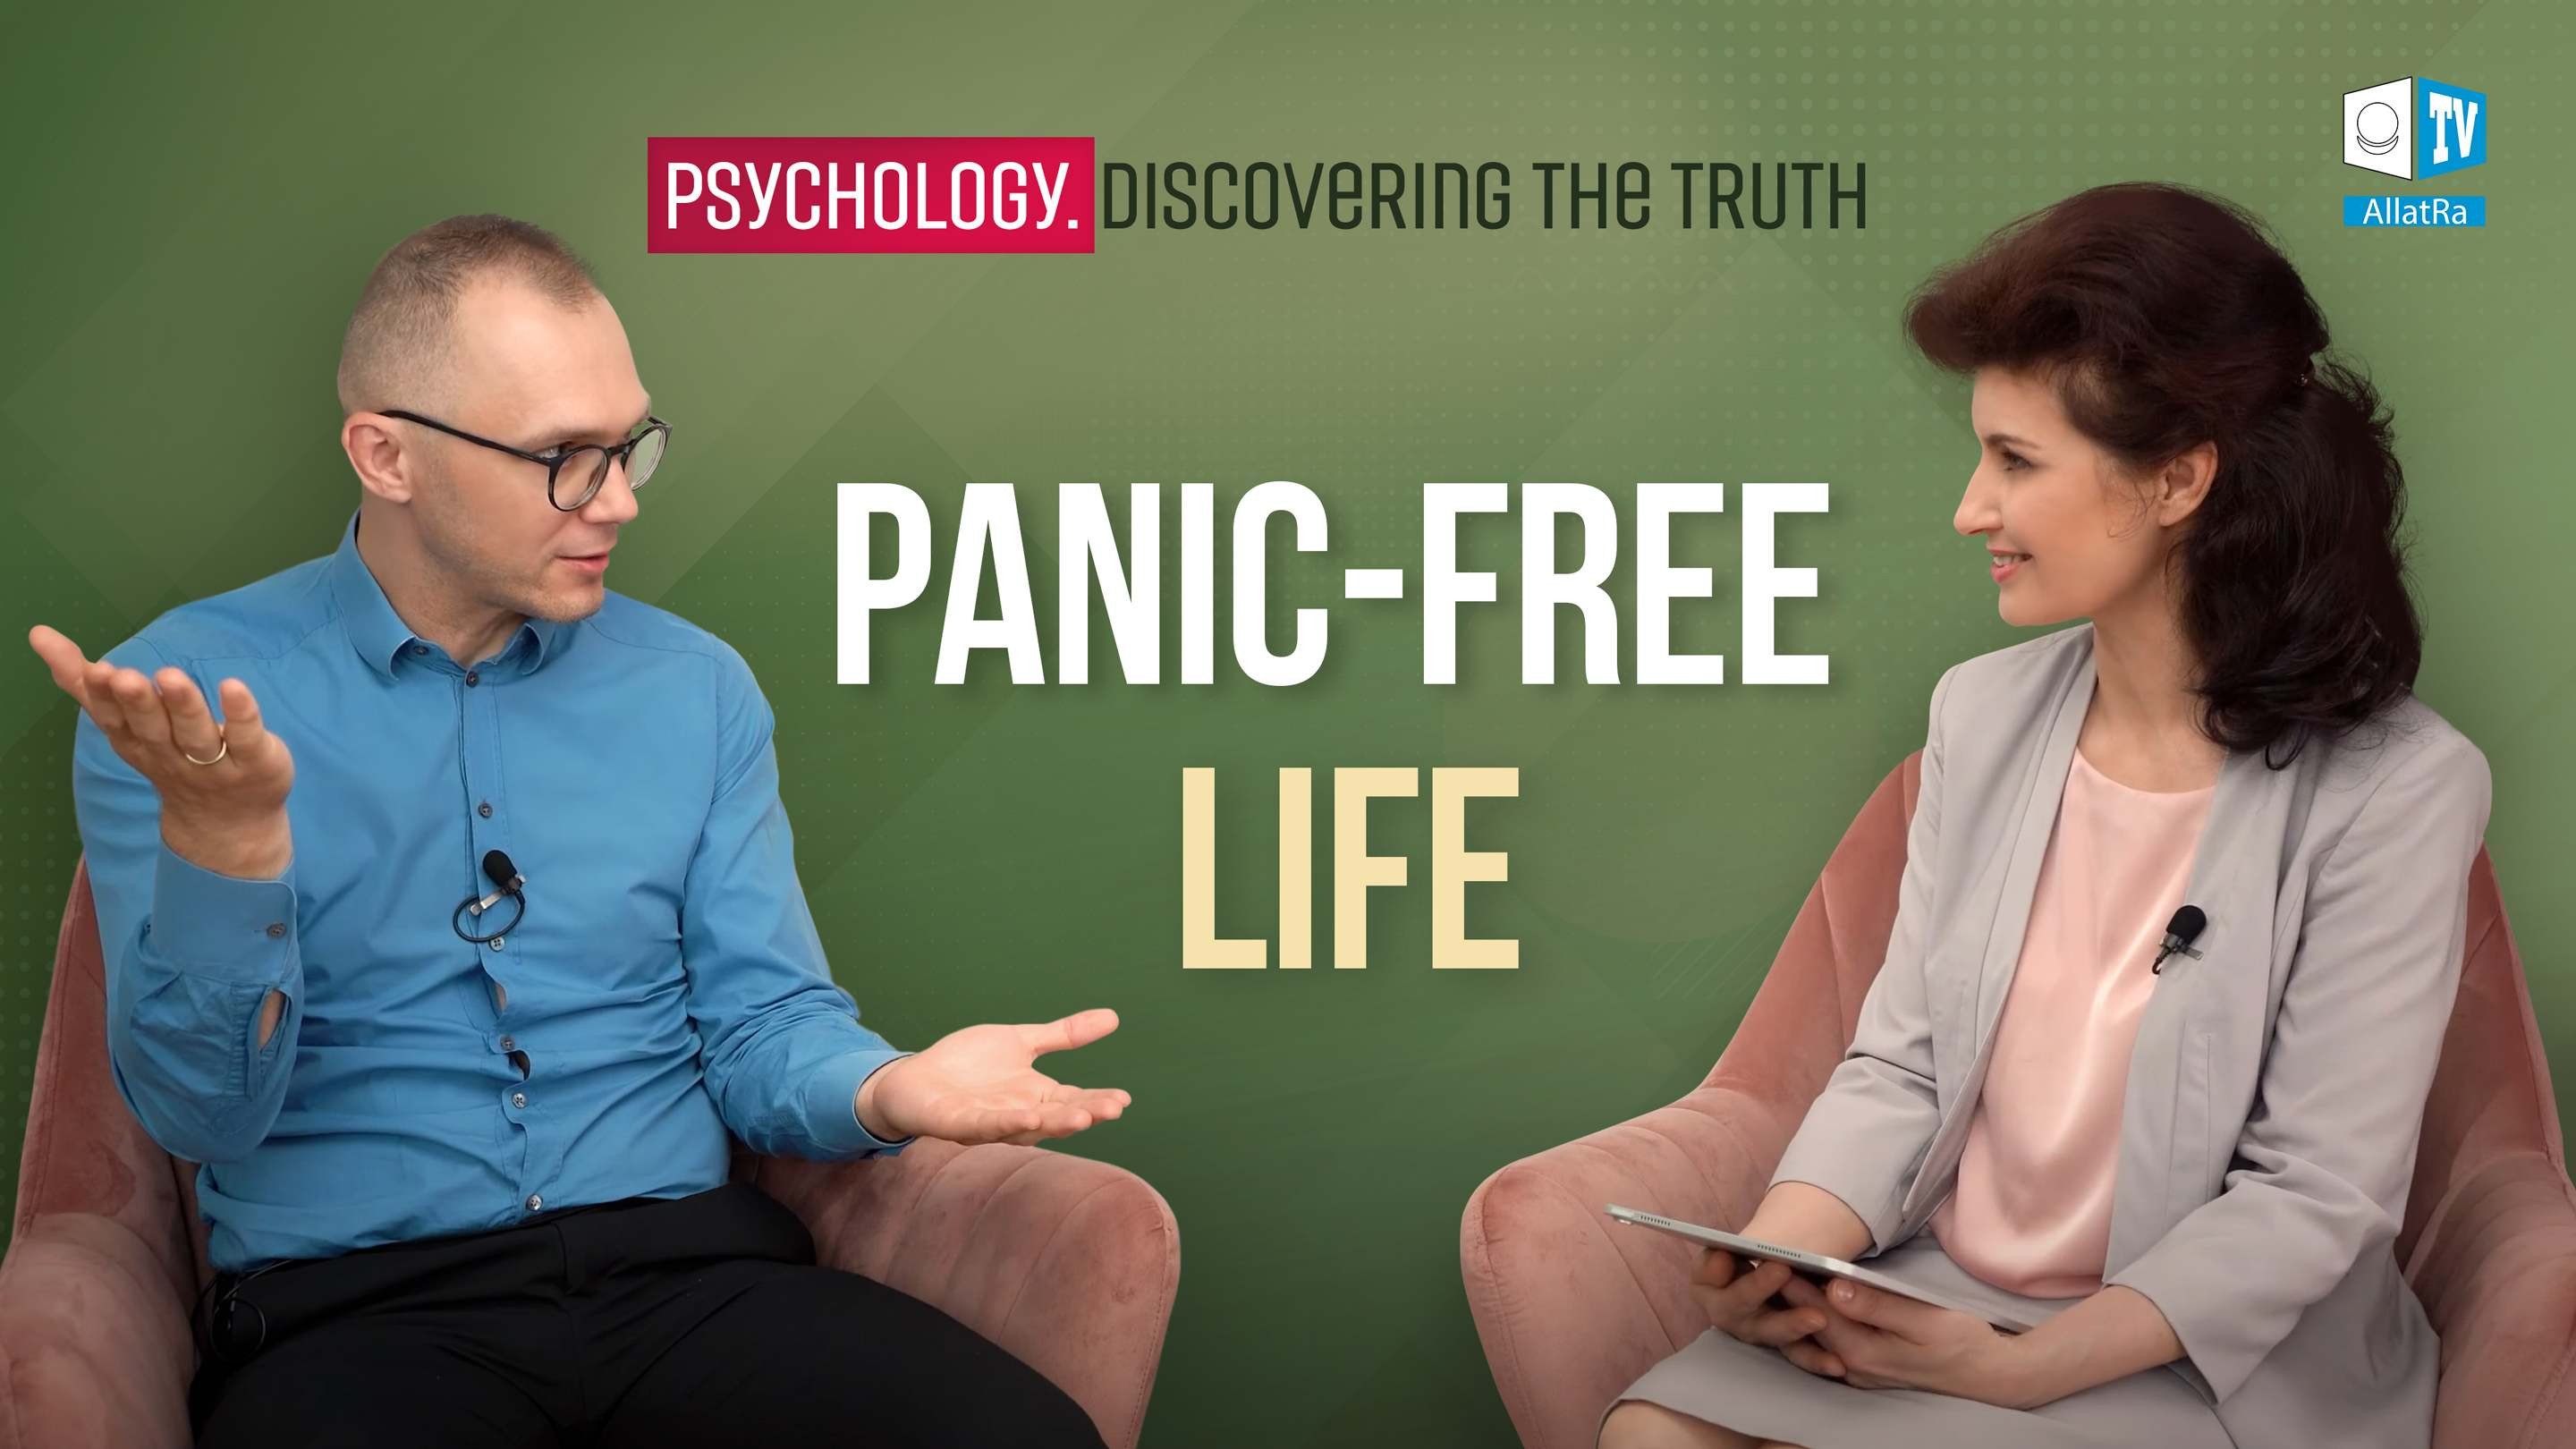 Best Protection Against Panic Attacks. Psychology. Discovering the Truth